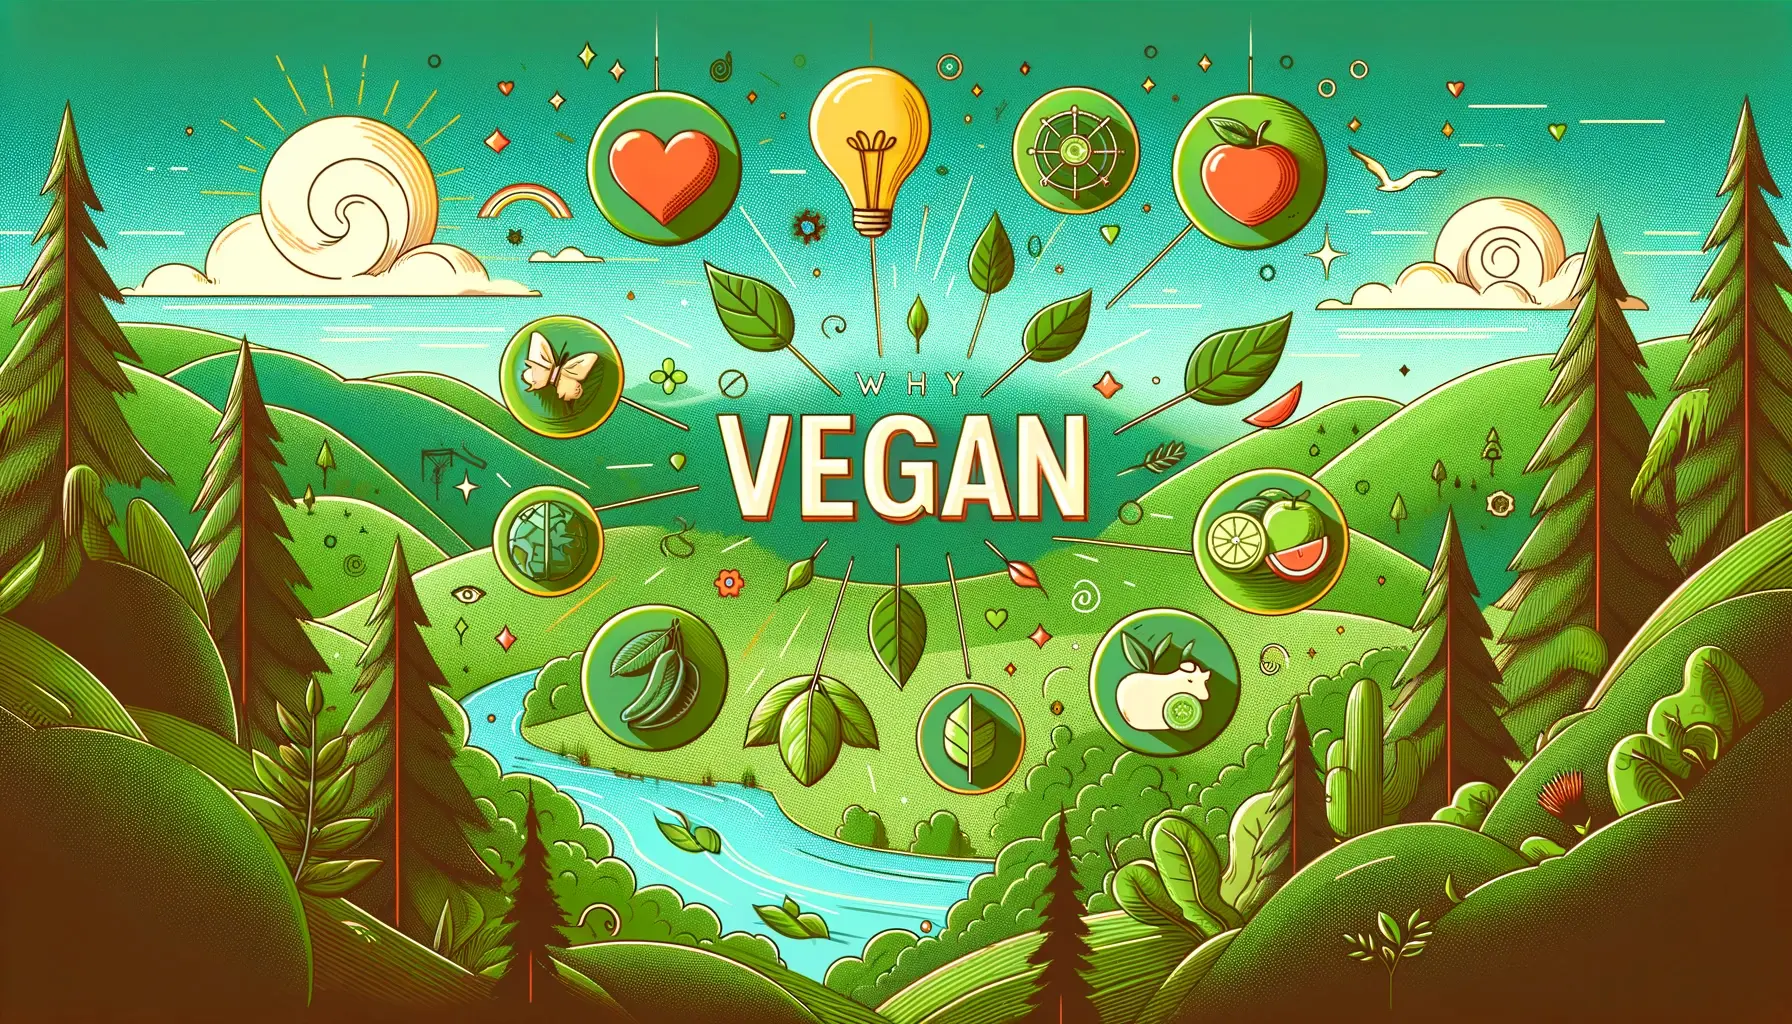 Why Vegan page hero section, featuring symbols representing animal welfare, environmental concerns, and health concerns